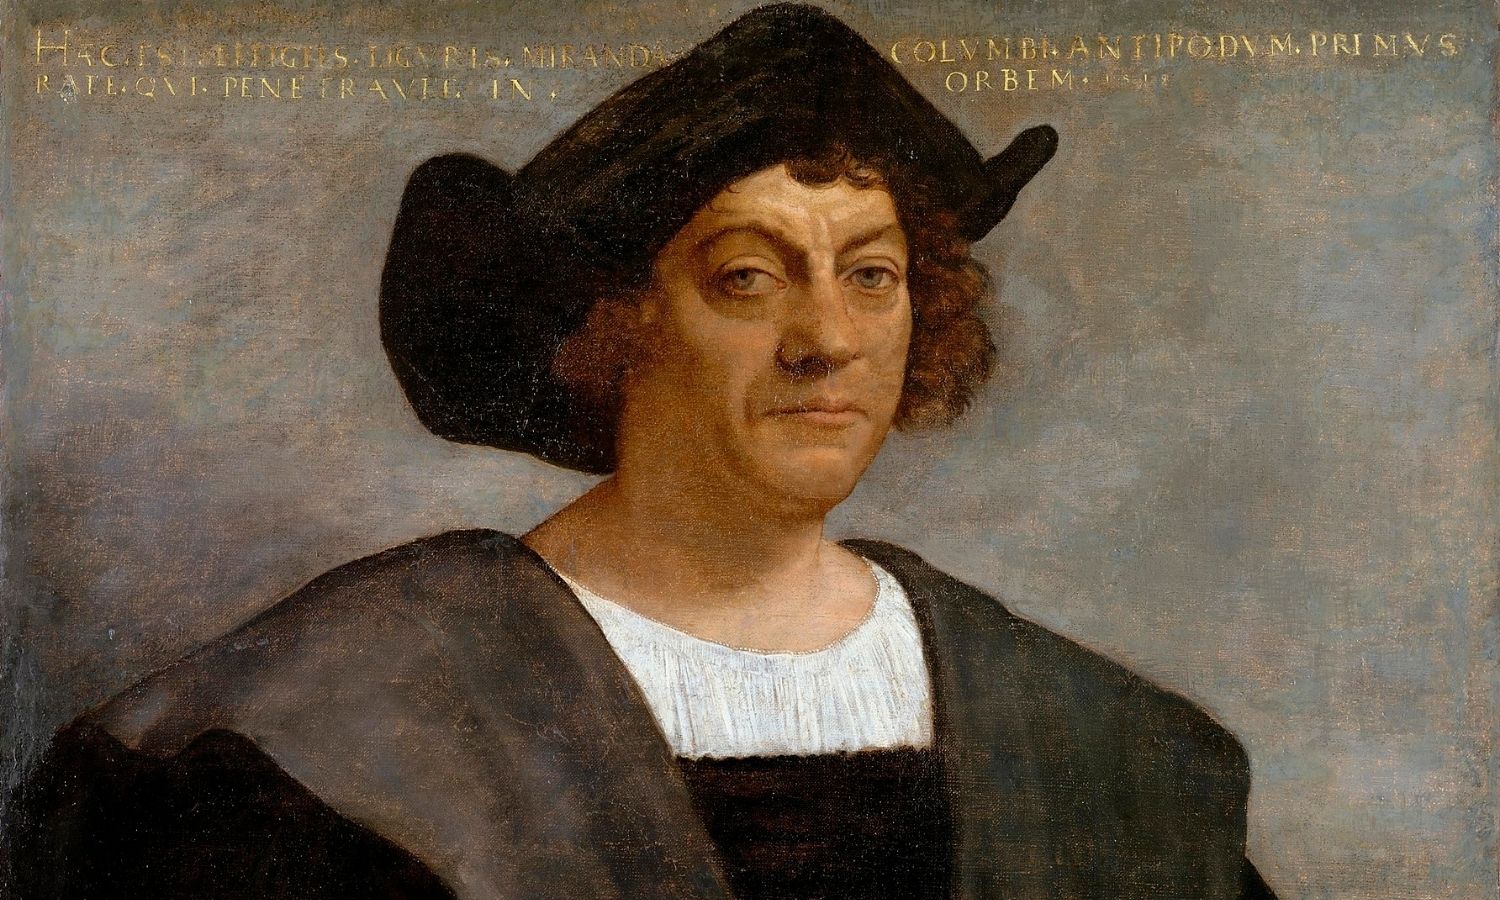 OTD in 1493: Christopher Columbus discovered Sint Maarten in the West Indies.